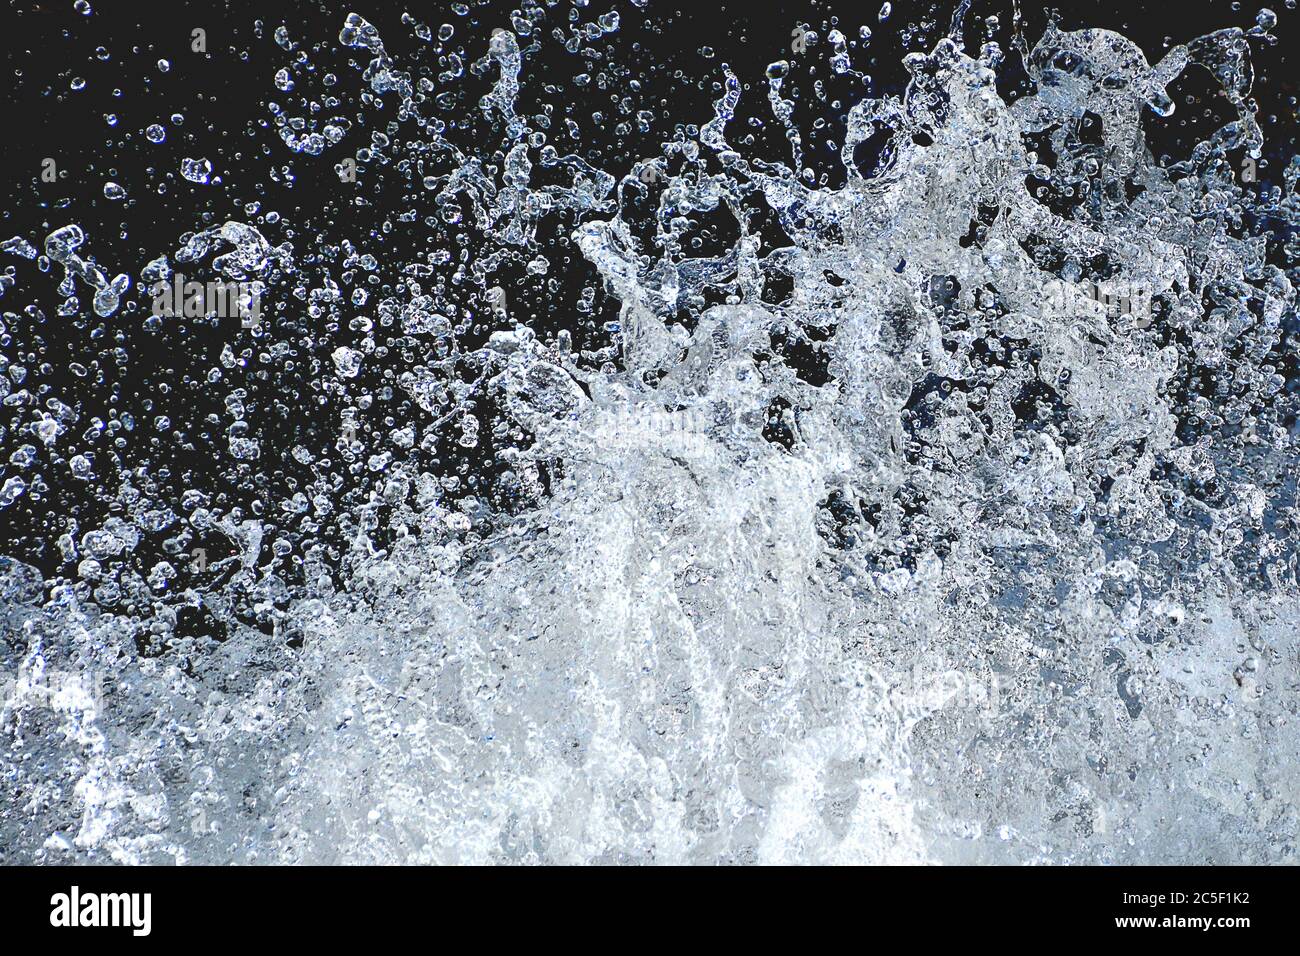 Attention-grabbing closeup of shimmering drops of water splashing up from rushing stream, captured in midair, and isolated against dark background. Stock Photo